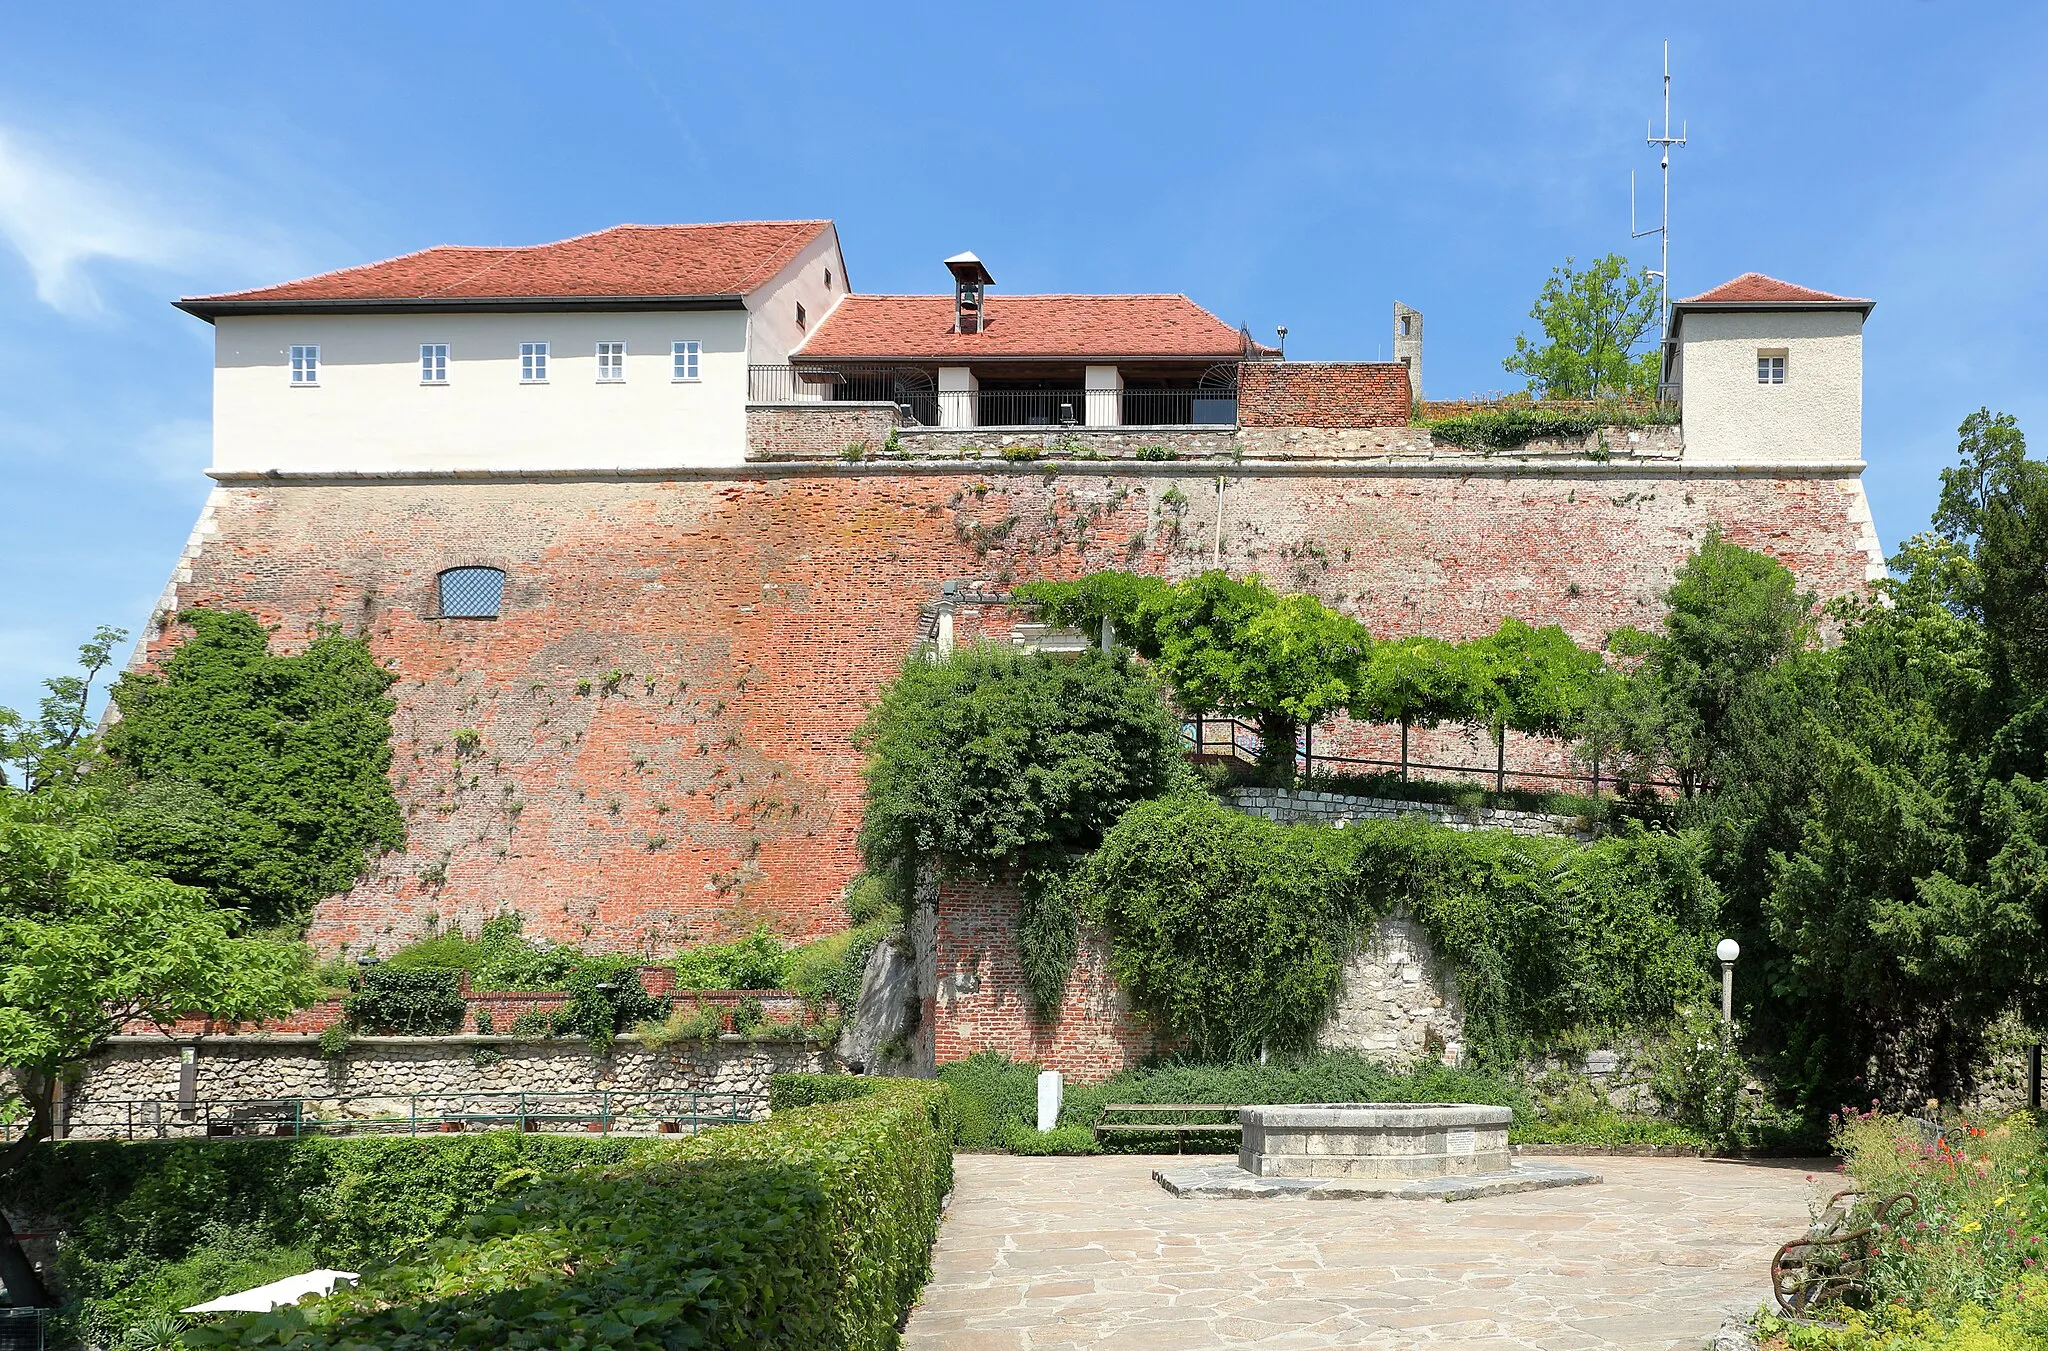 Photo showing: The Stable or Cannon Bastion on the Graz Schlossberg, Austria.